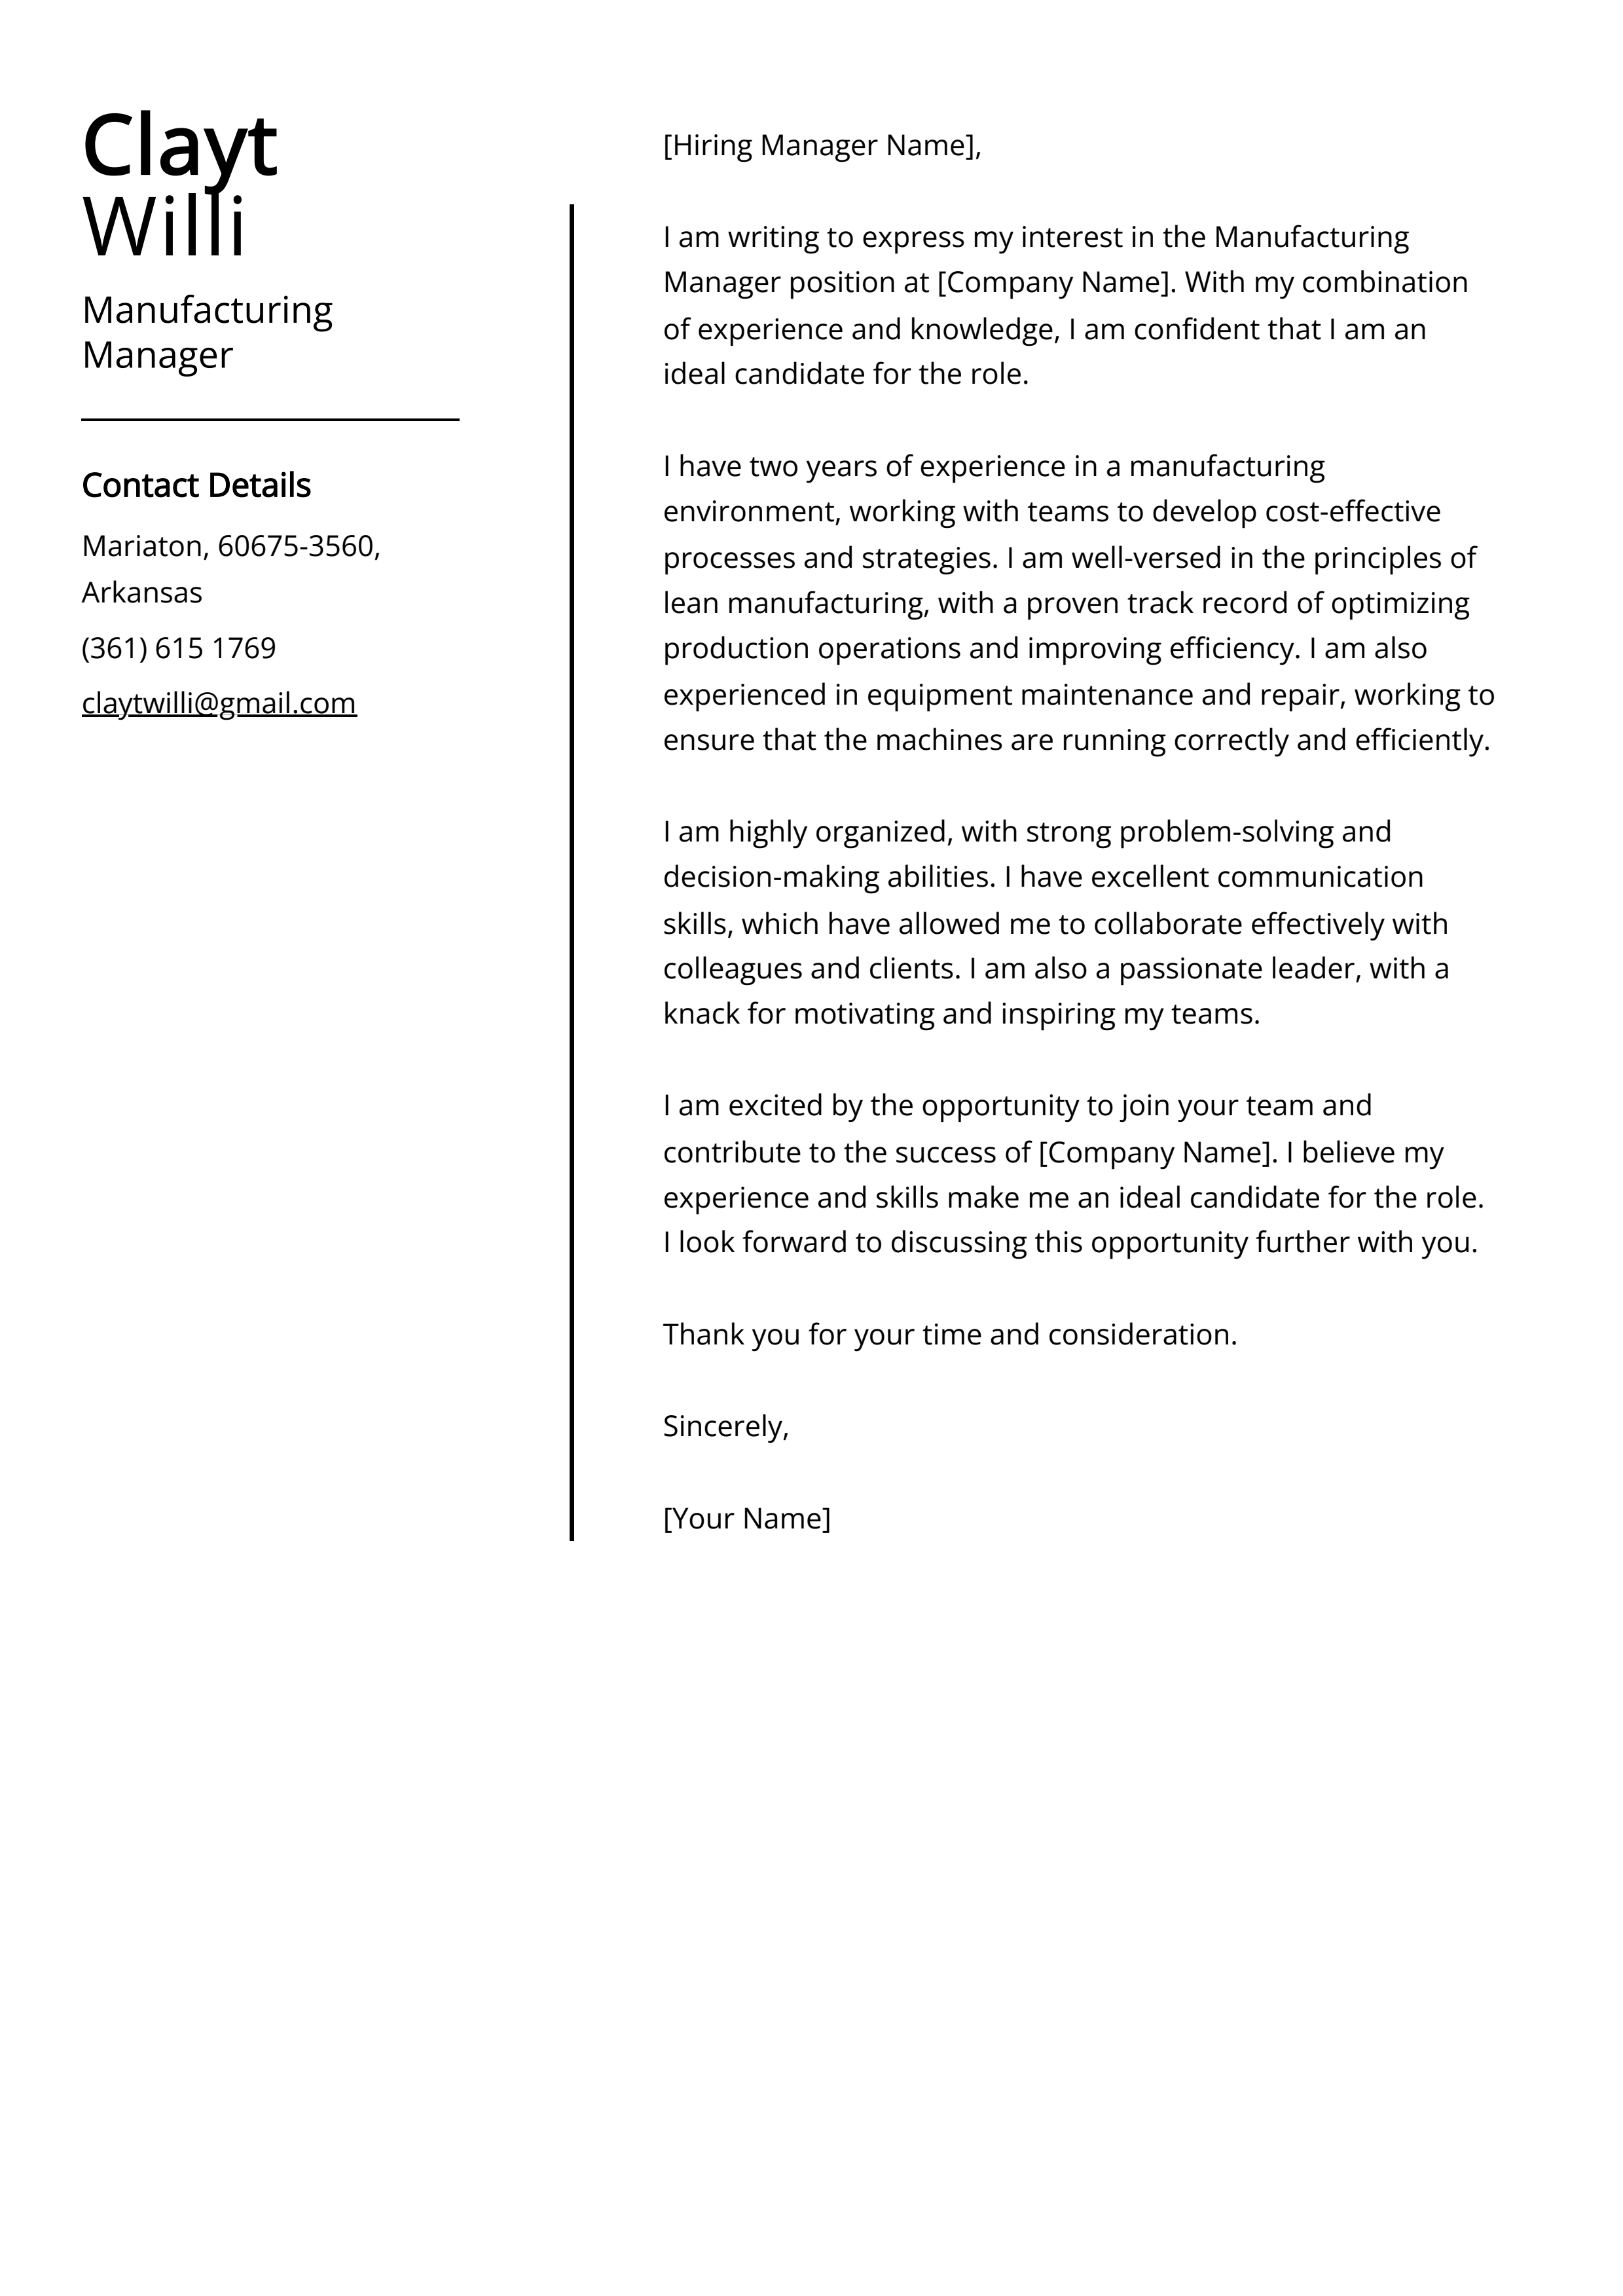 Manufacturing Manager Cover Letter Example